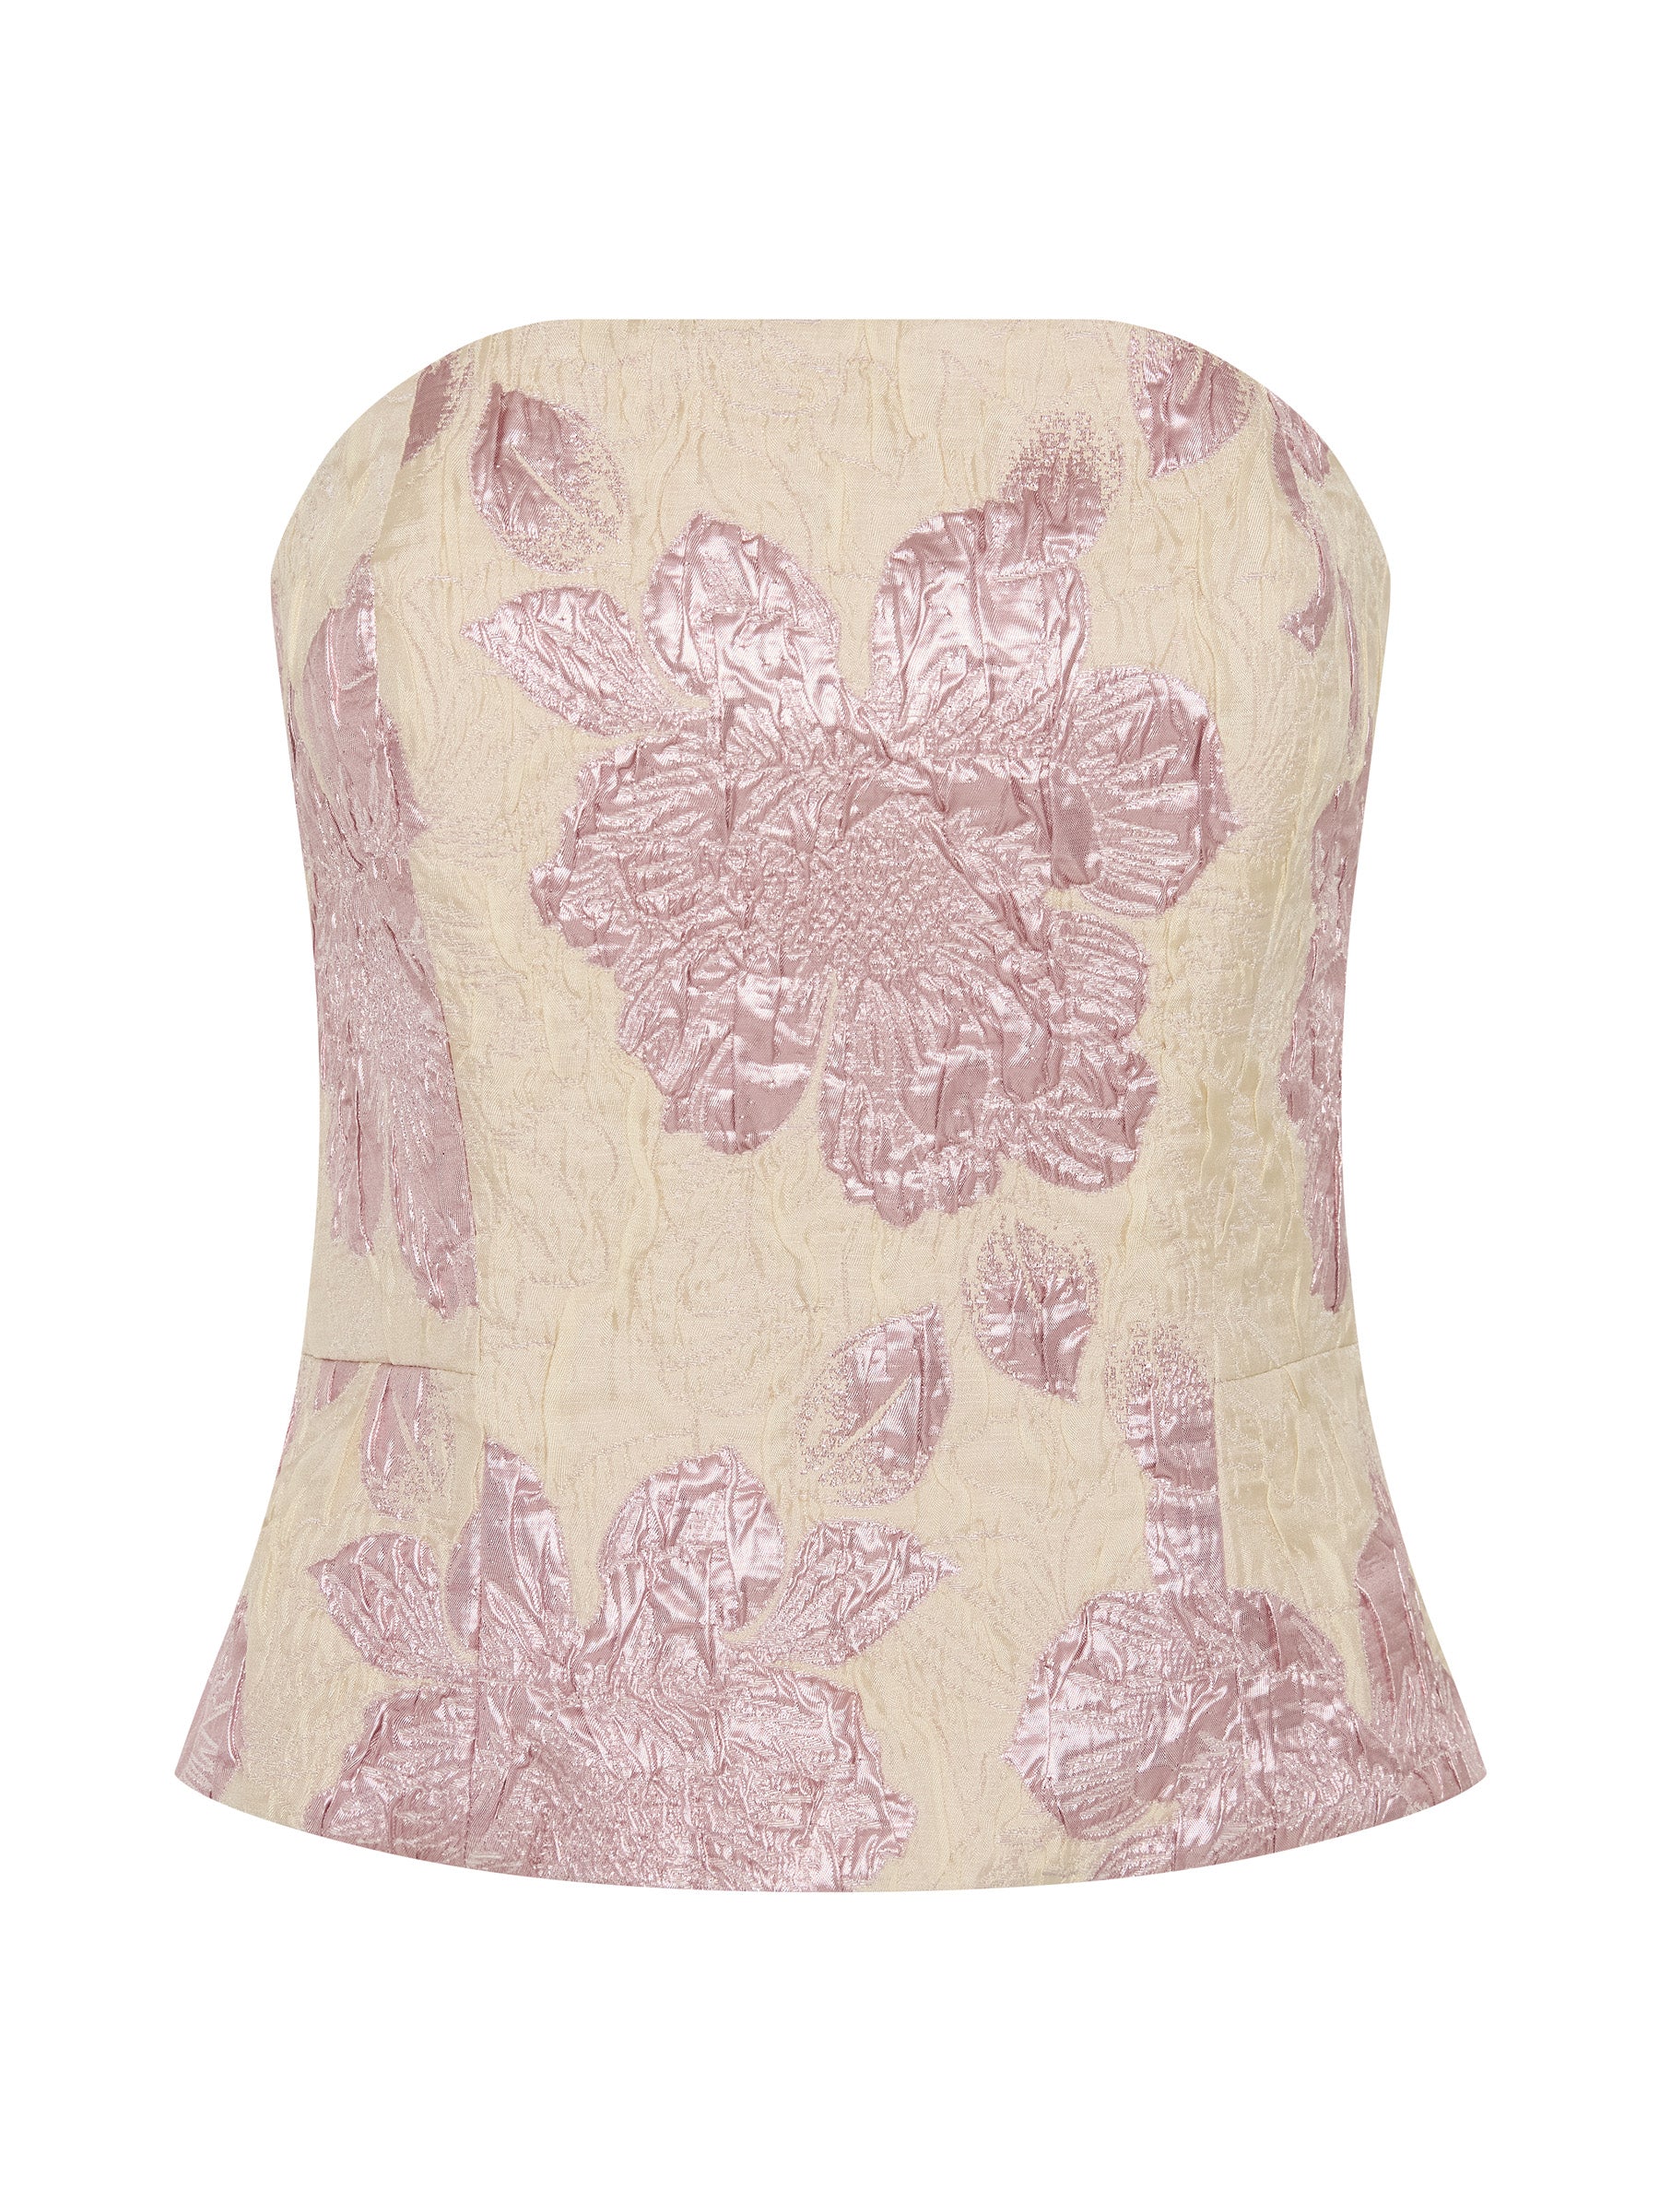 Cressida Bustier - Pink/Cream (Size 10 + 12 Only)